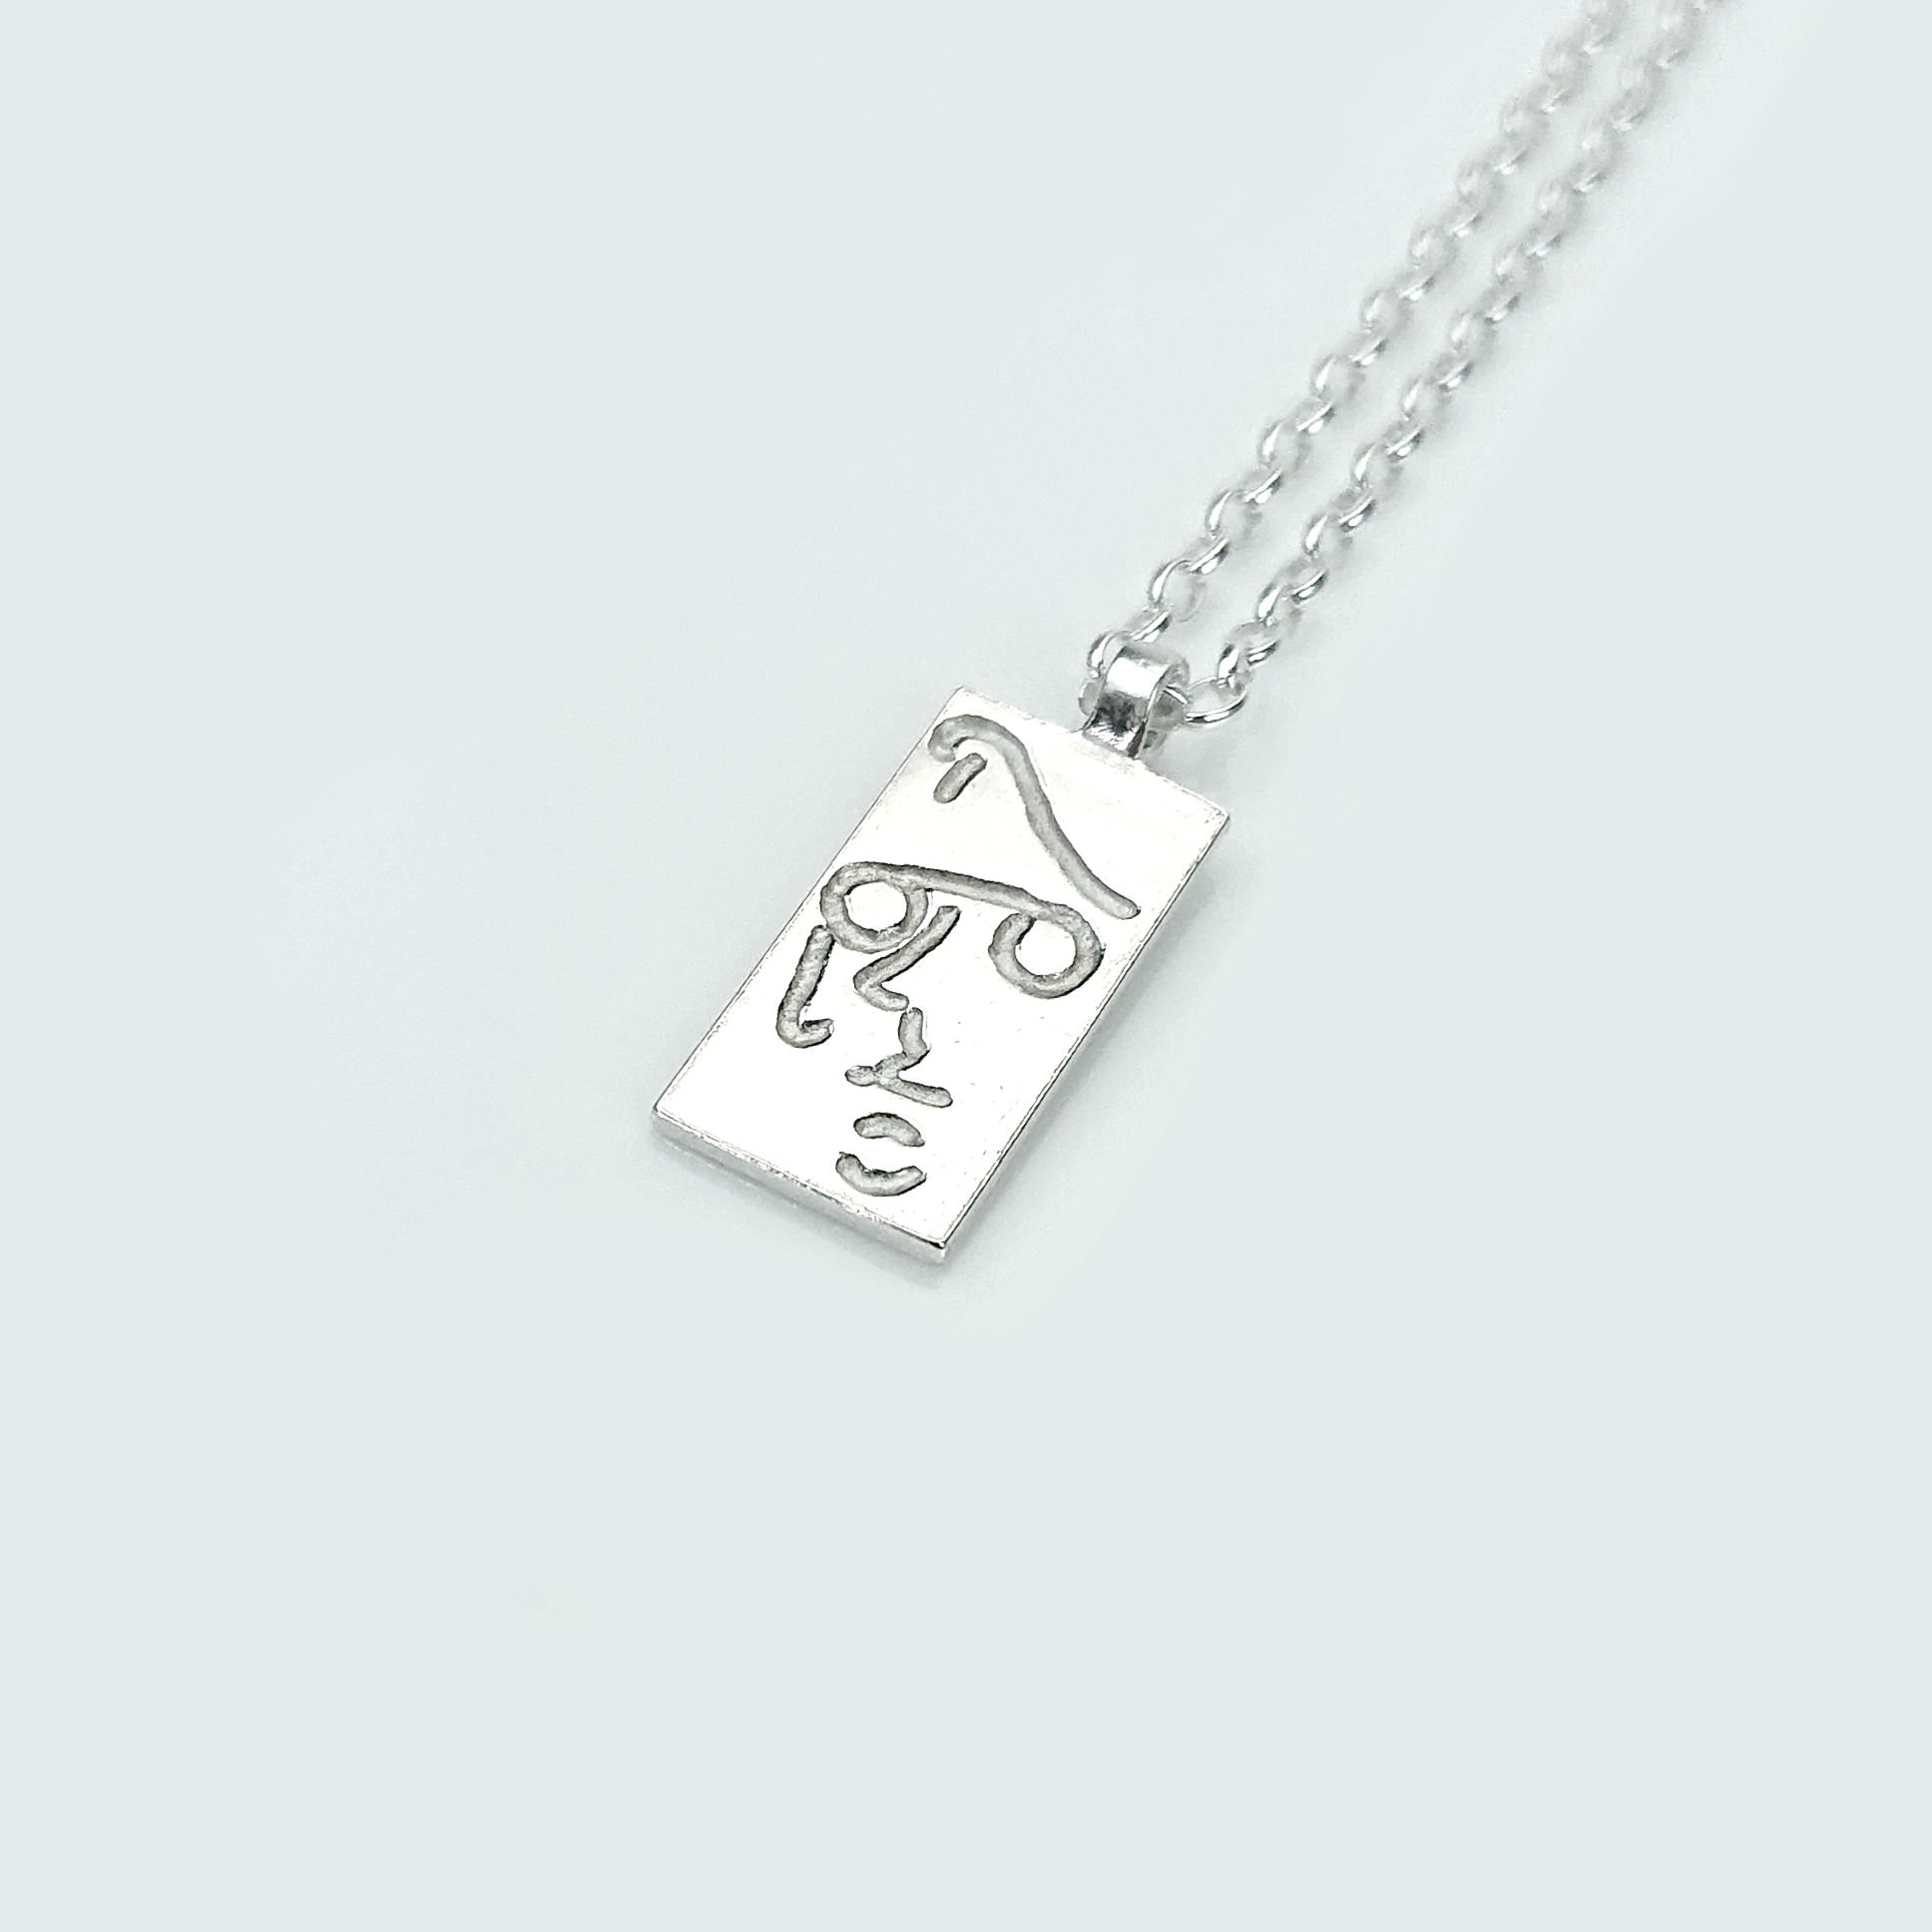 Yeats | Sterling Silver Portrait Pendant | The Cat & The Moon